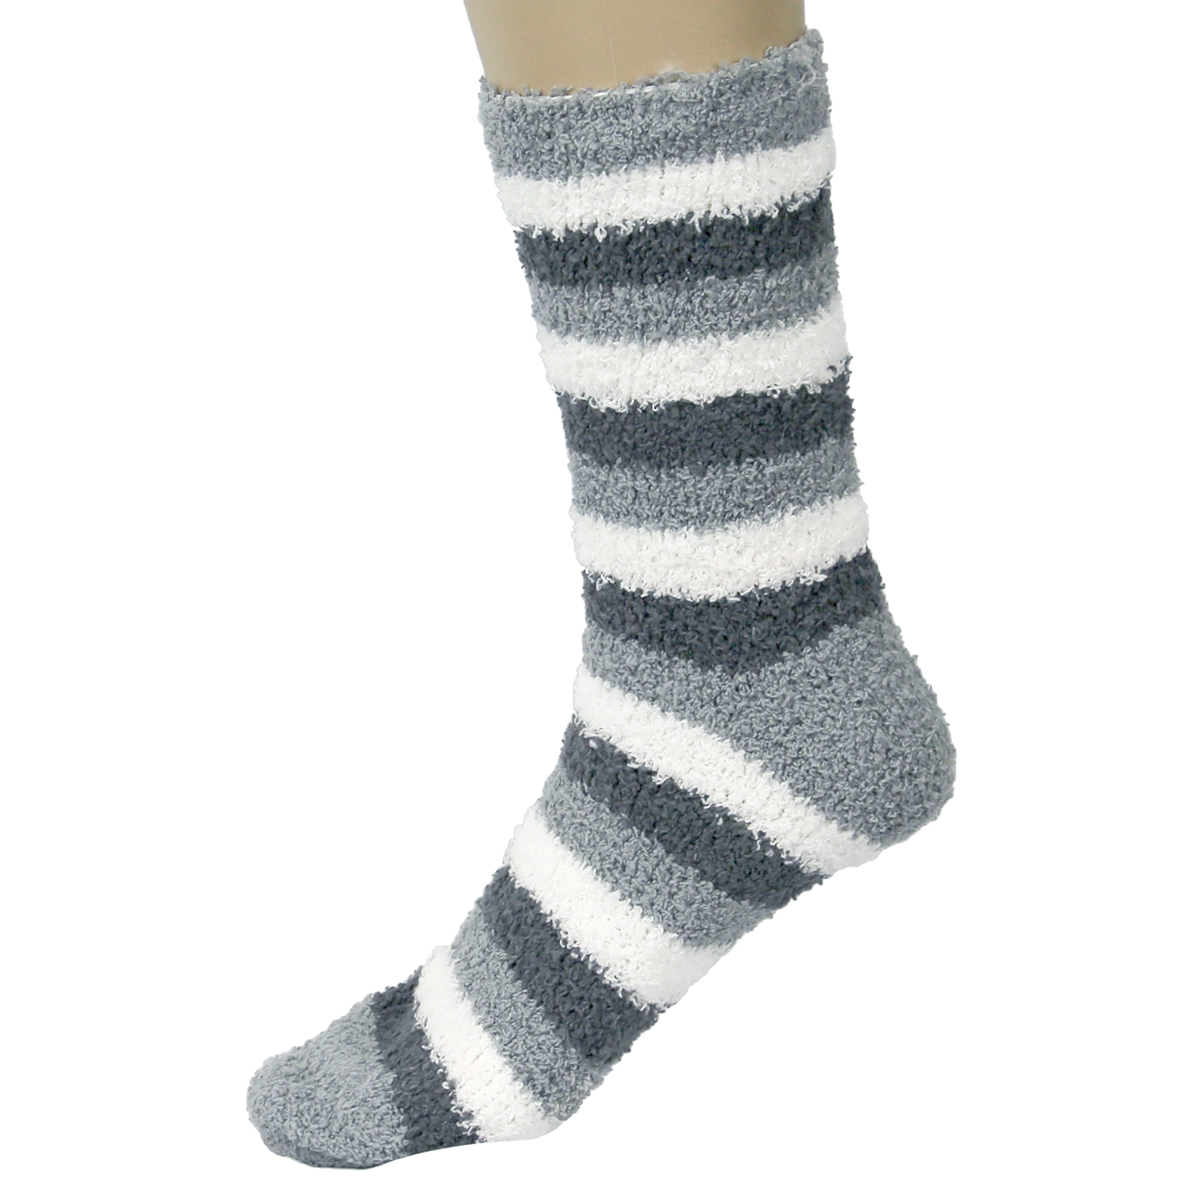 Men's Warm Fuzzy Socks Striped Cool Fluffy Colorful Winter Comfortable ...